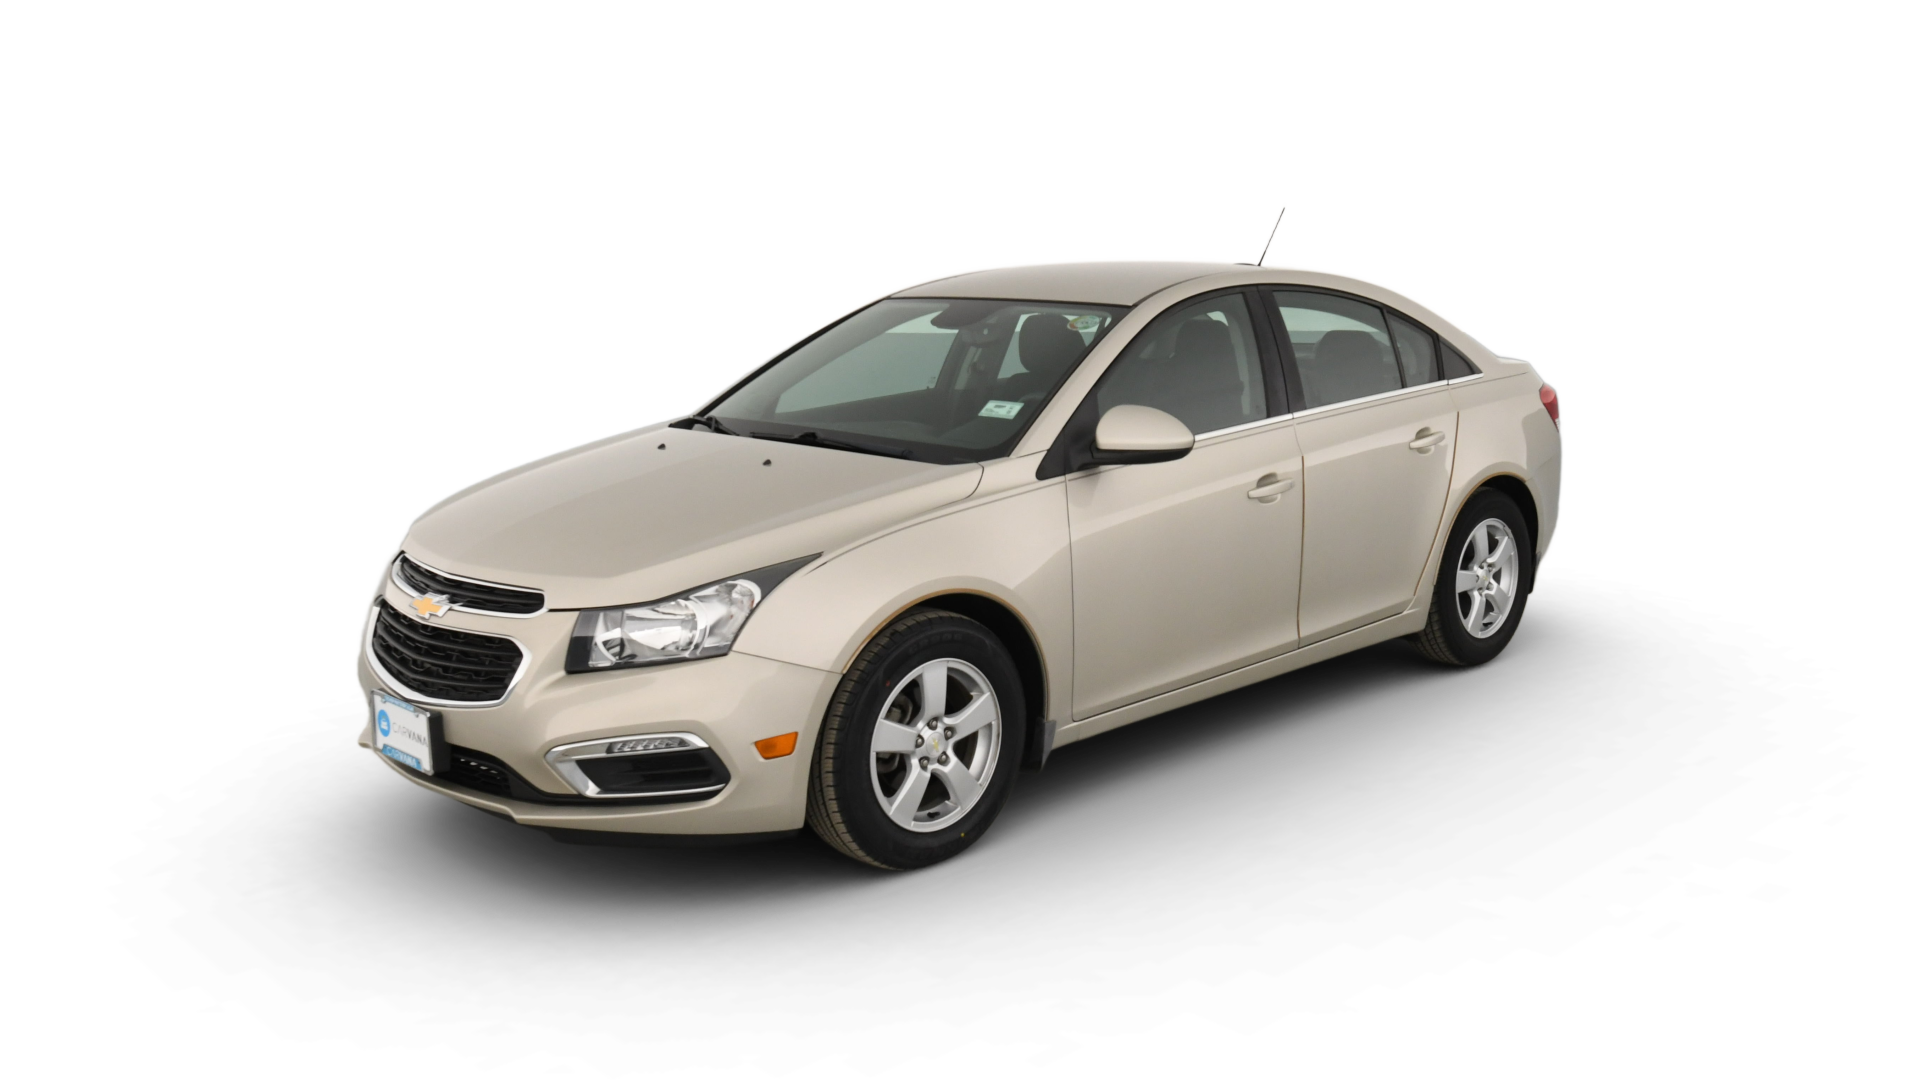 Used Chevrolet Cruze Limited For Sale Online | Carvana